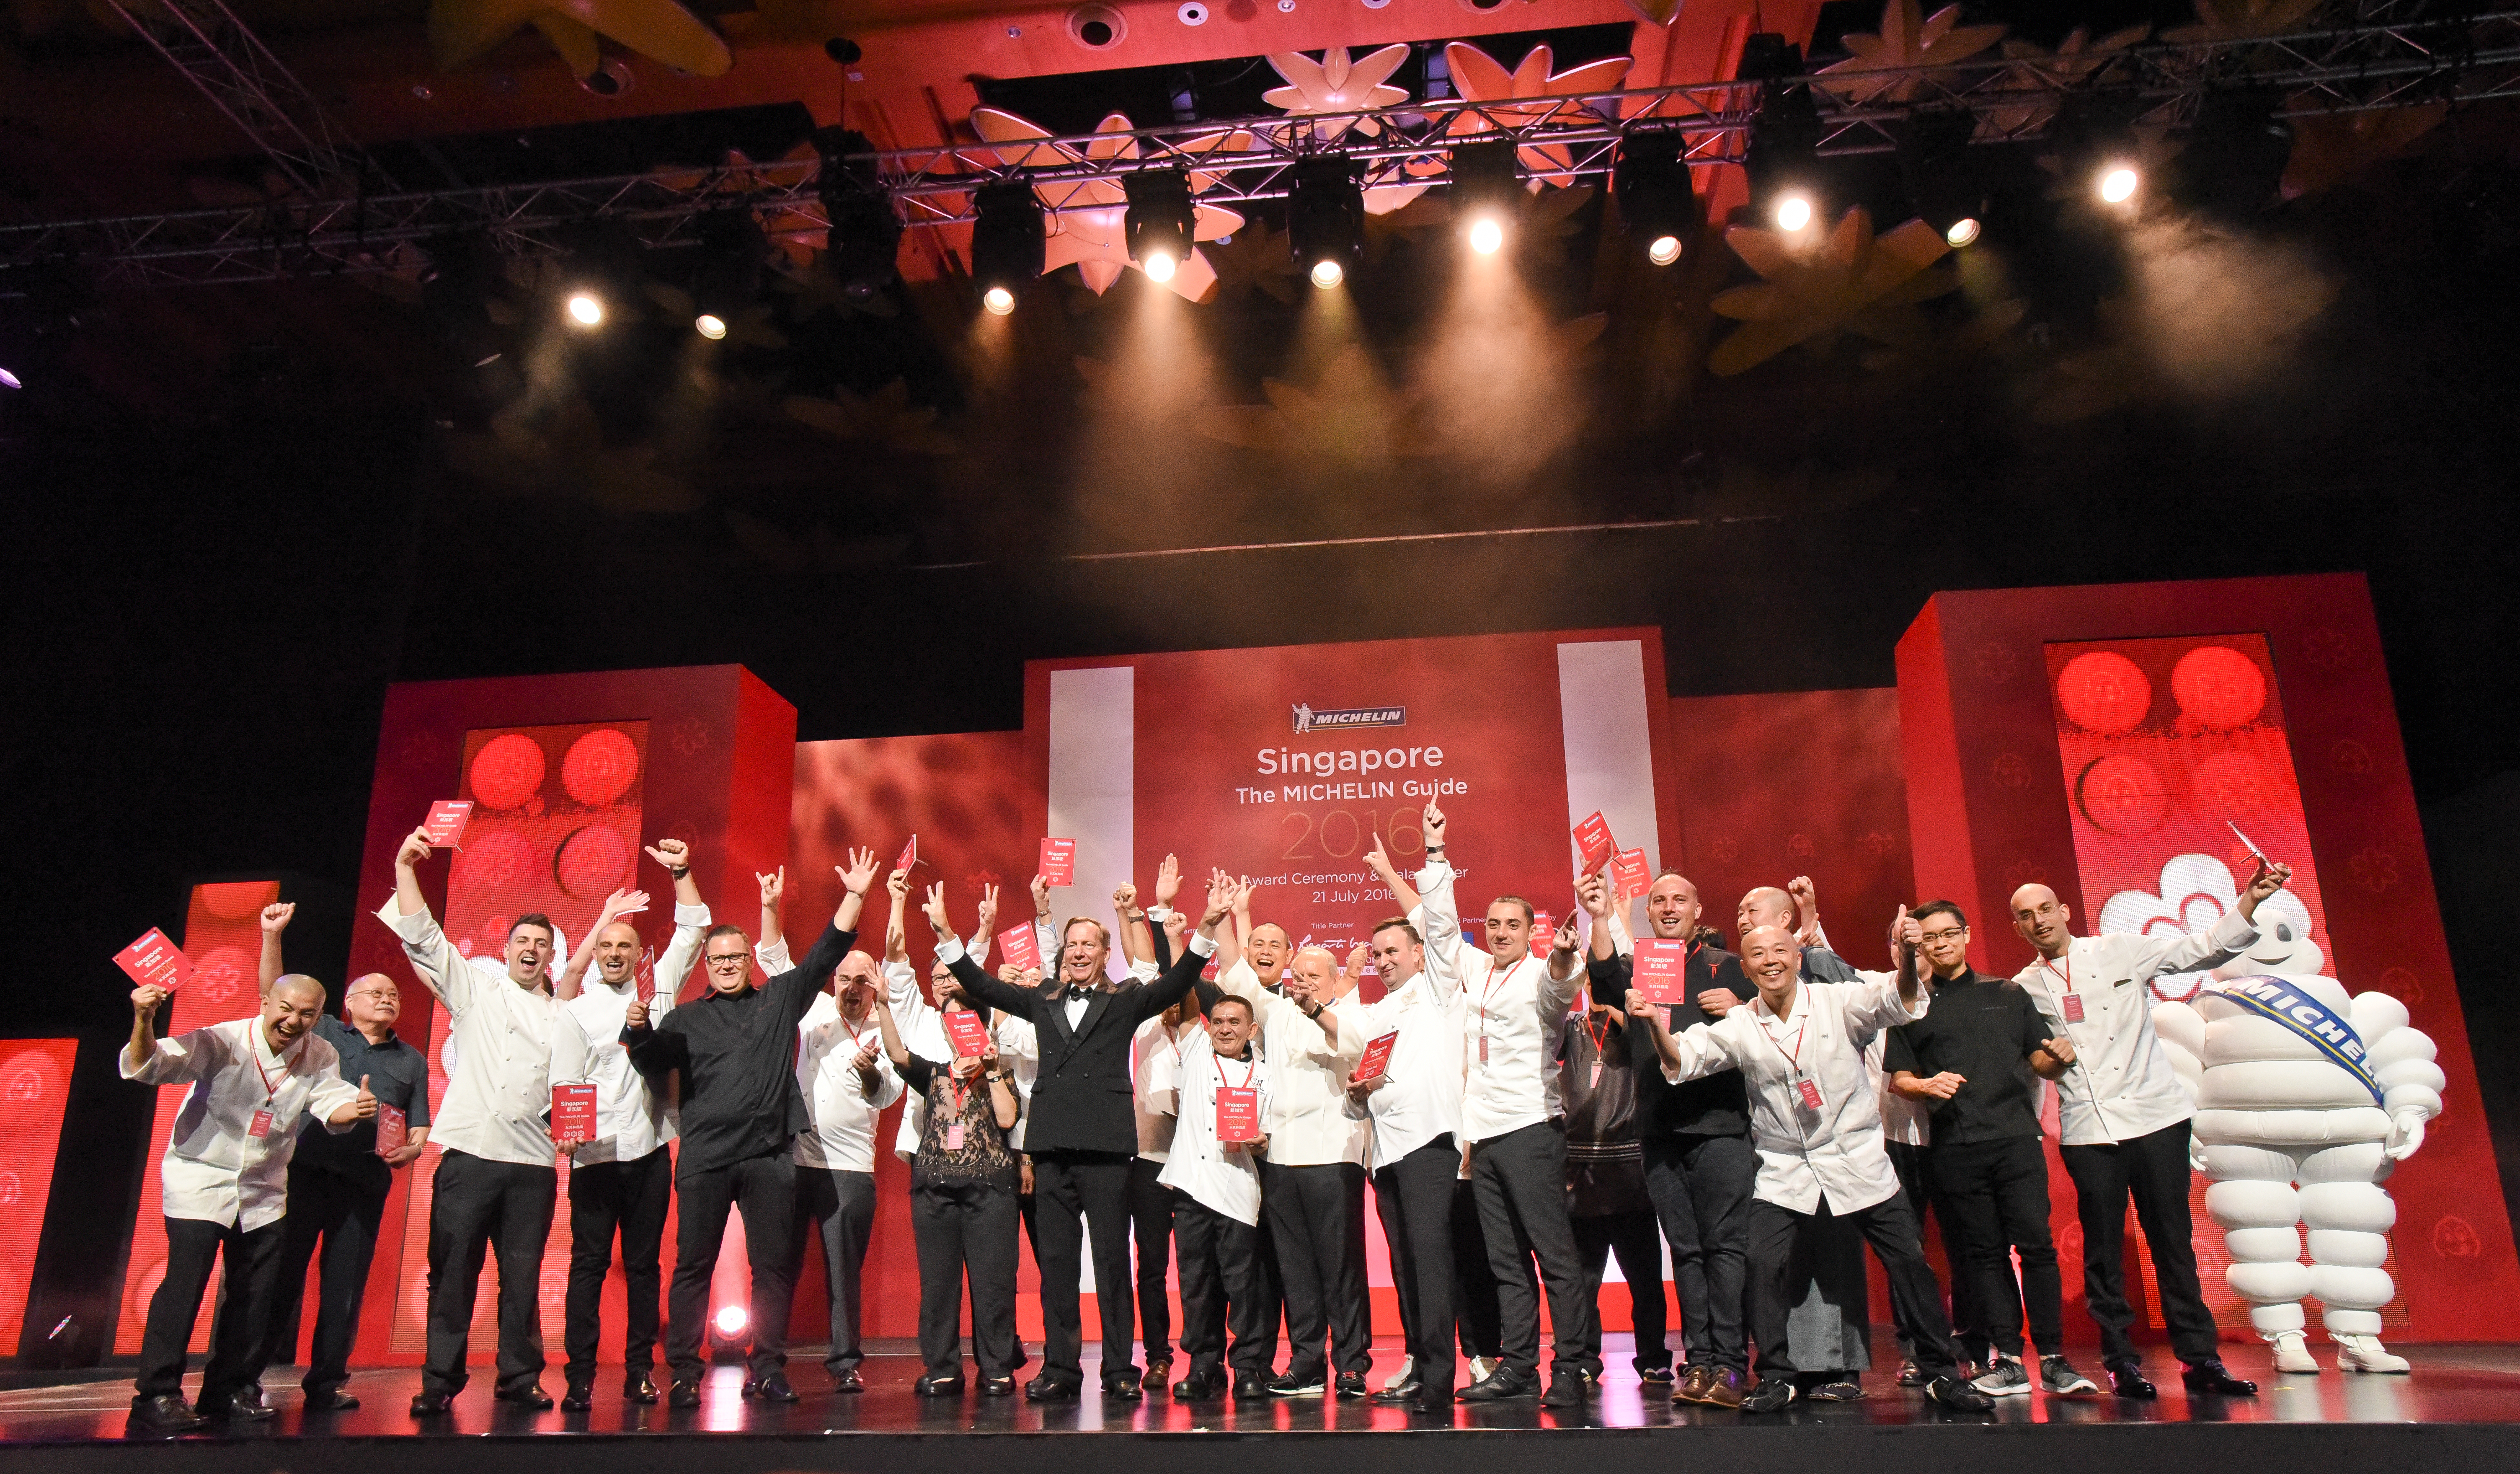 Michelin announced the first selection of the MICHELIN guide Singapore 2016-2